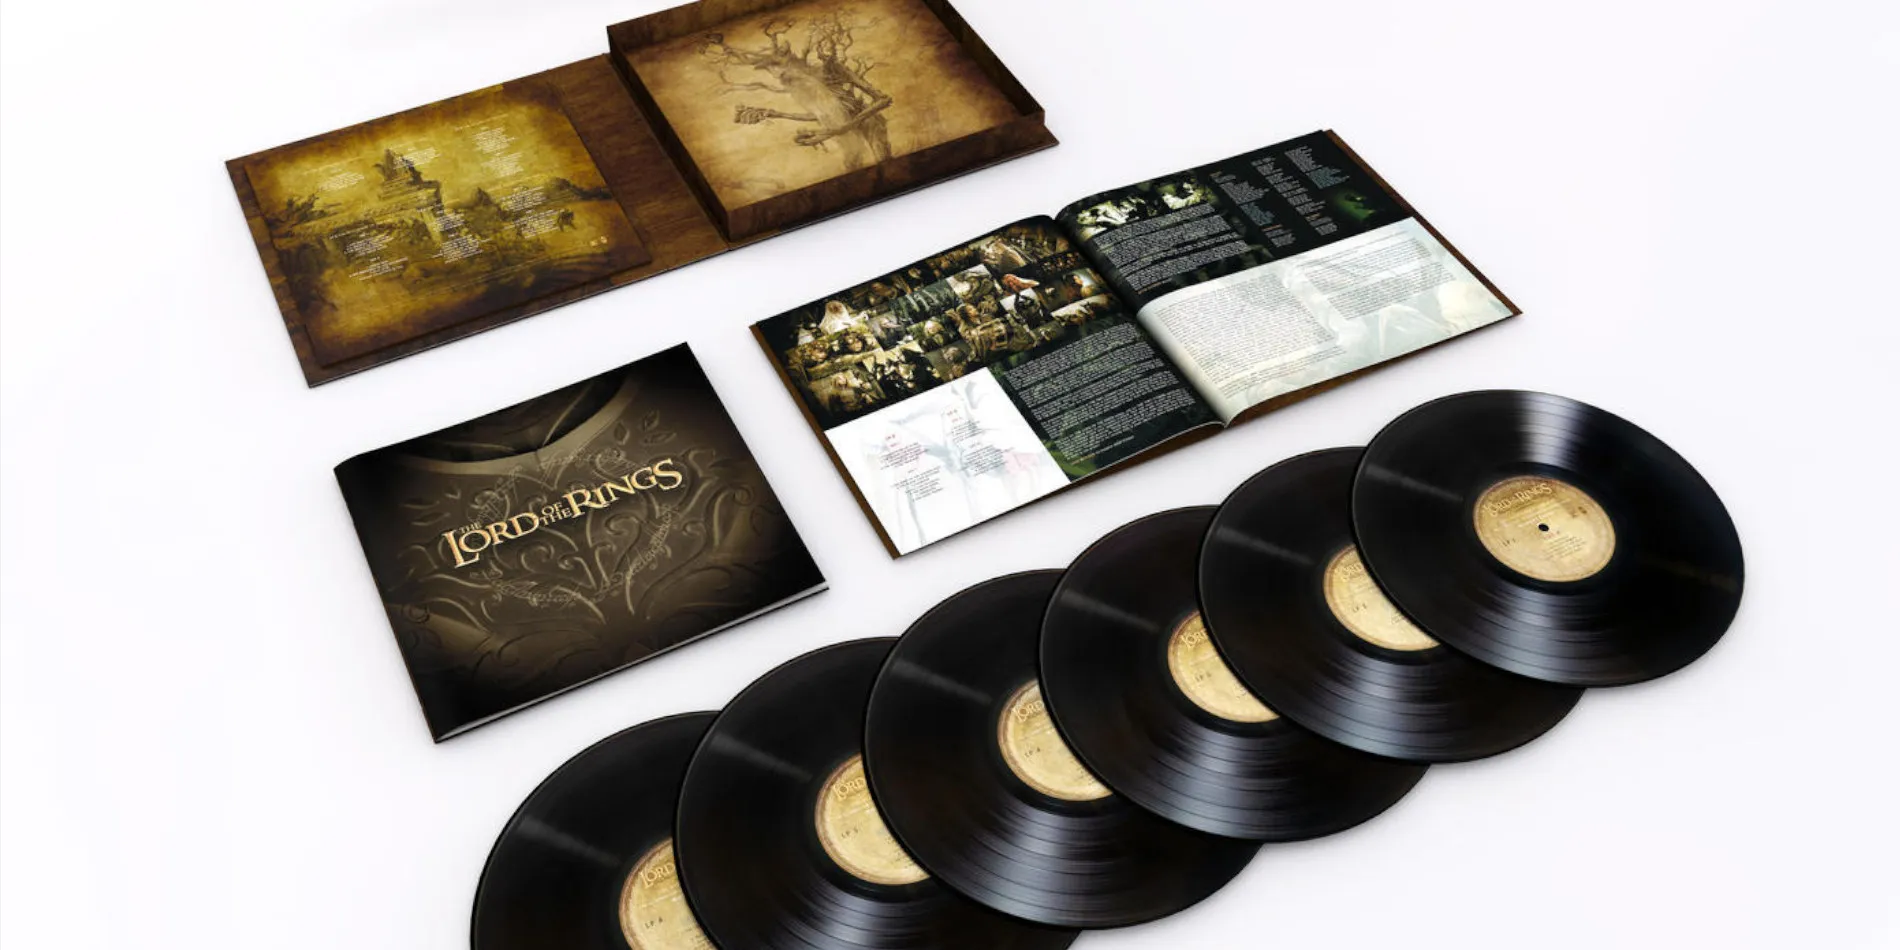 lotr The Lord of the Rings trilogy soundtrack